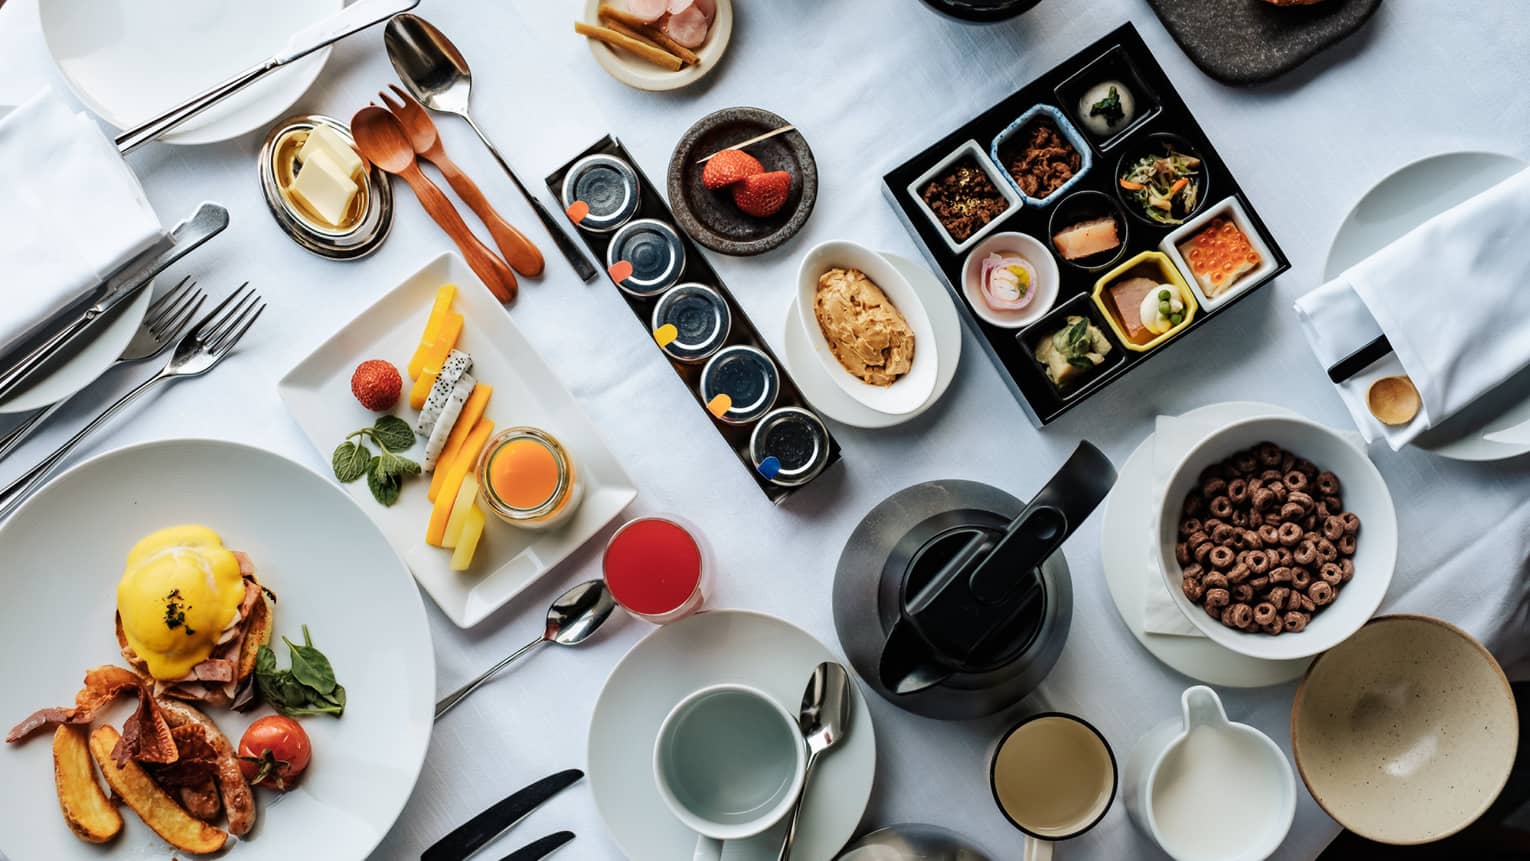 A wide array of Japanese and western-style breakfast foods, including eggs Benedict, assorted cheeses and sides